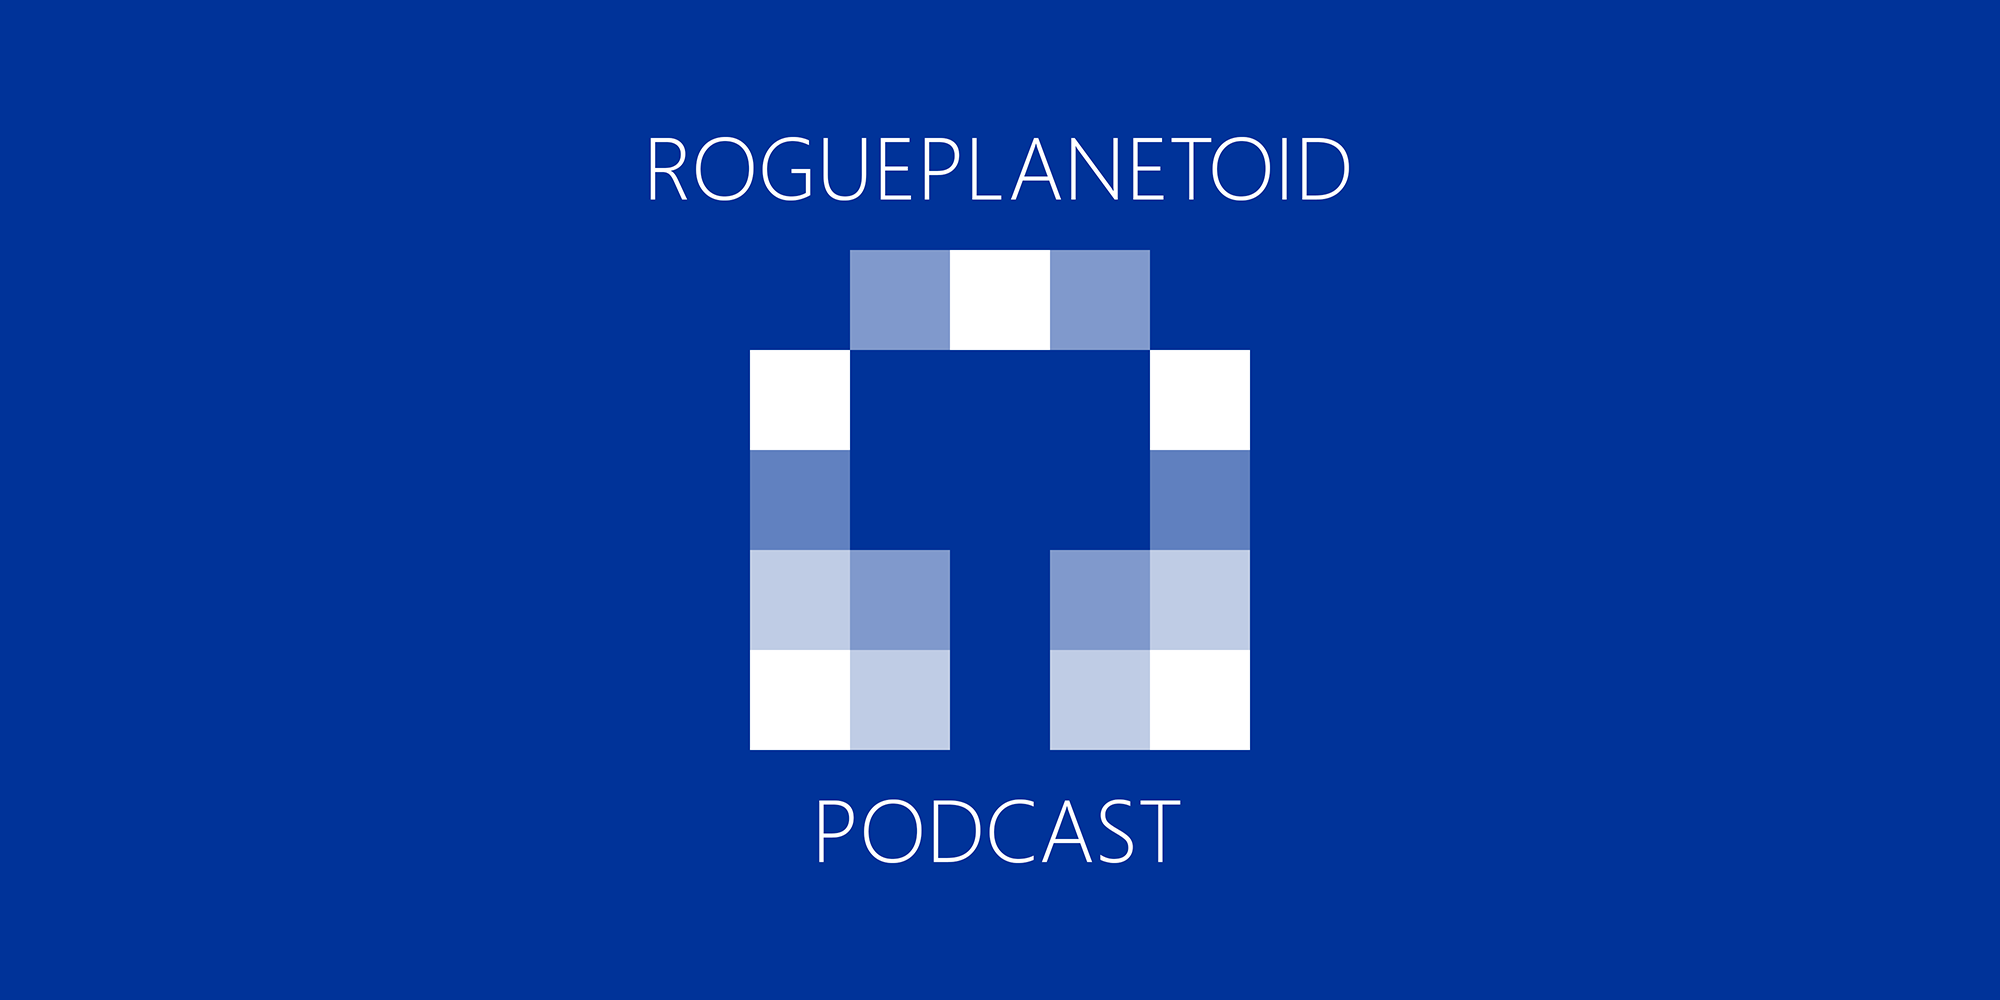 RoguePlanetoid Podcast - Episode Ten - Developers & AI